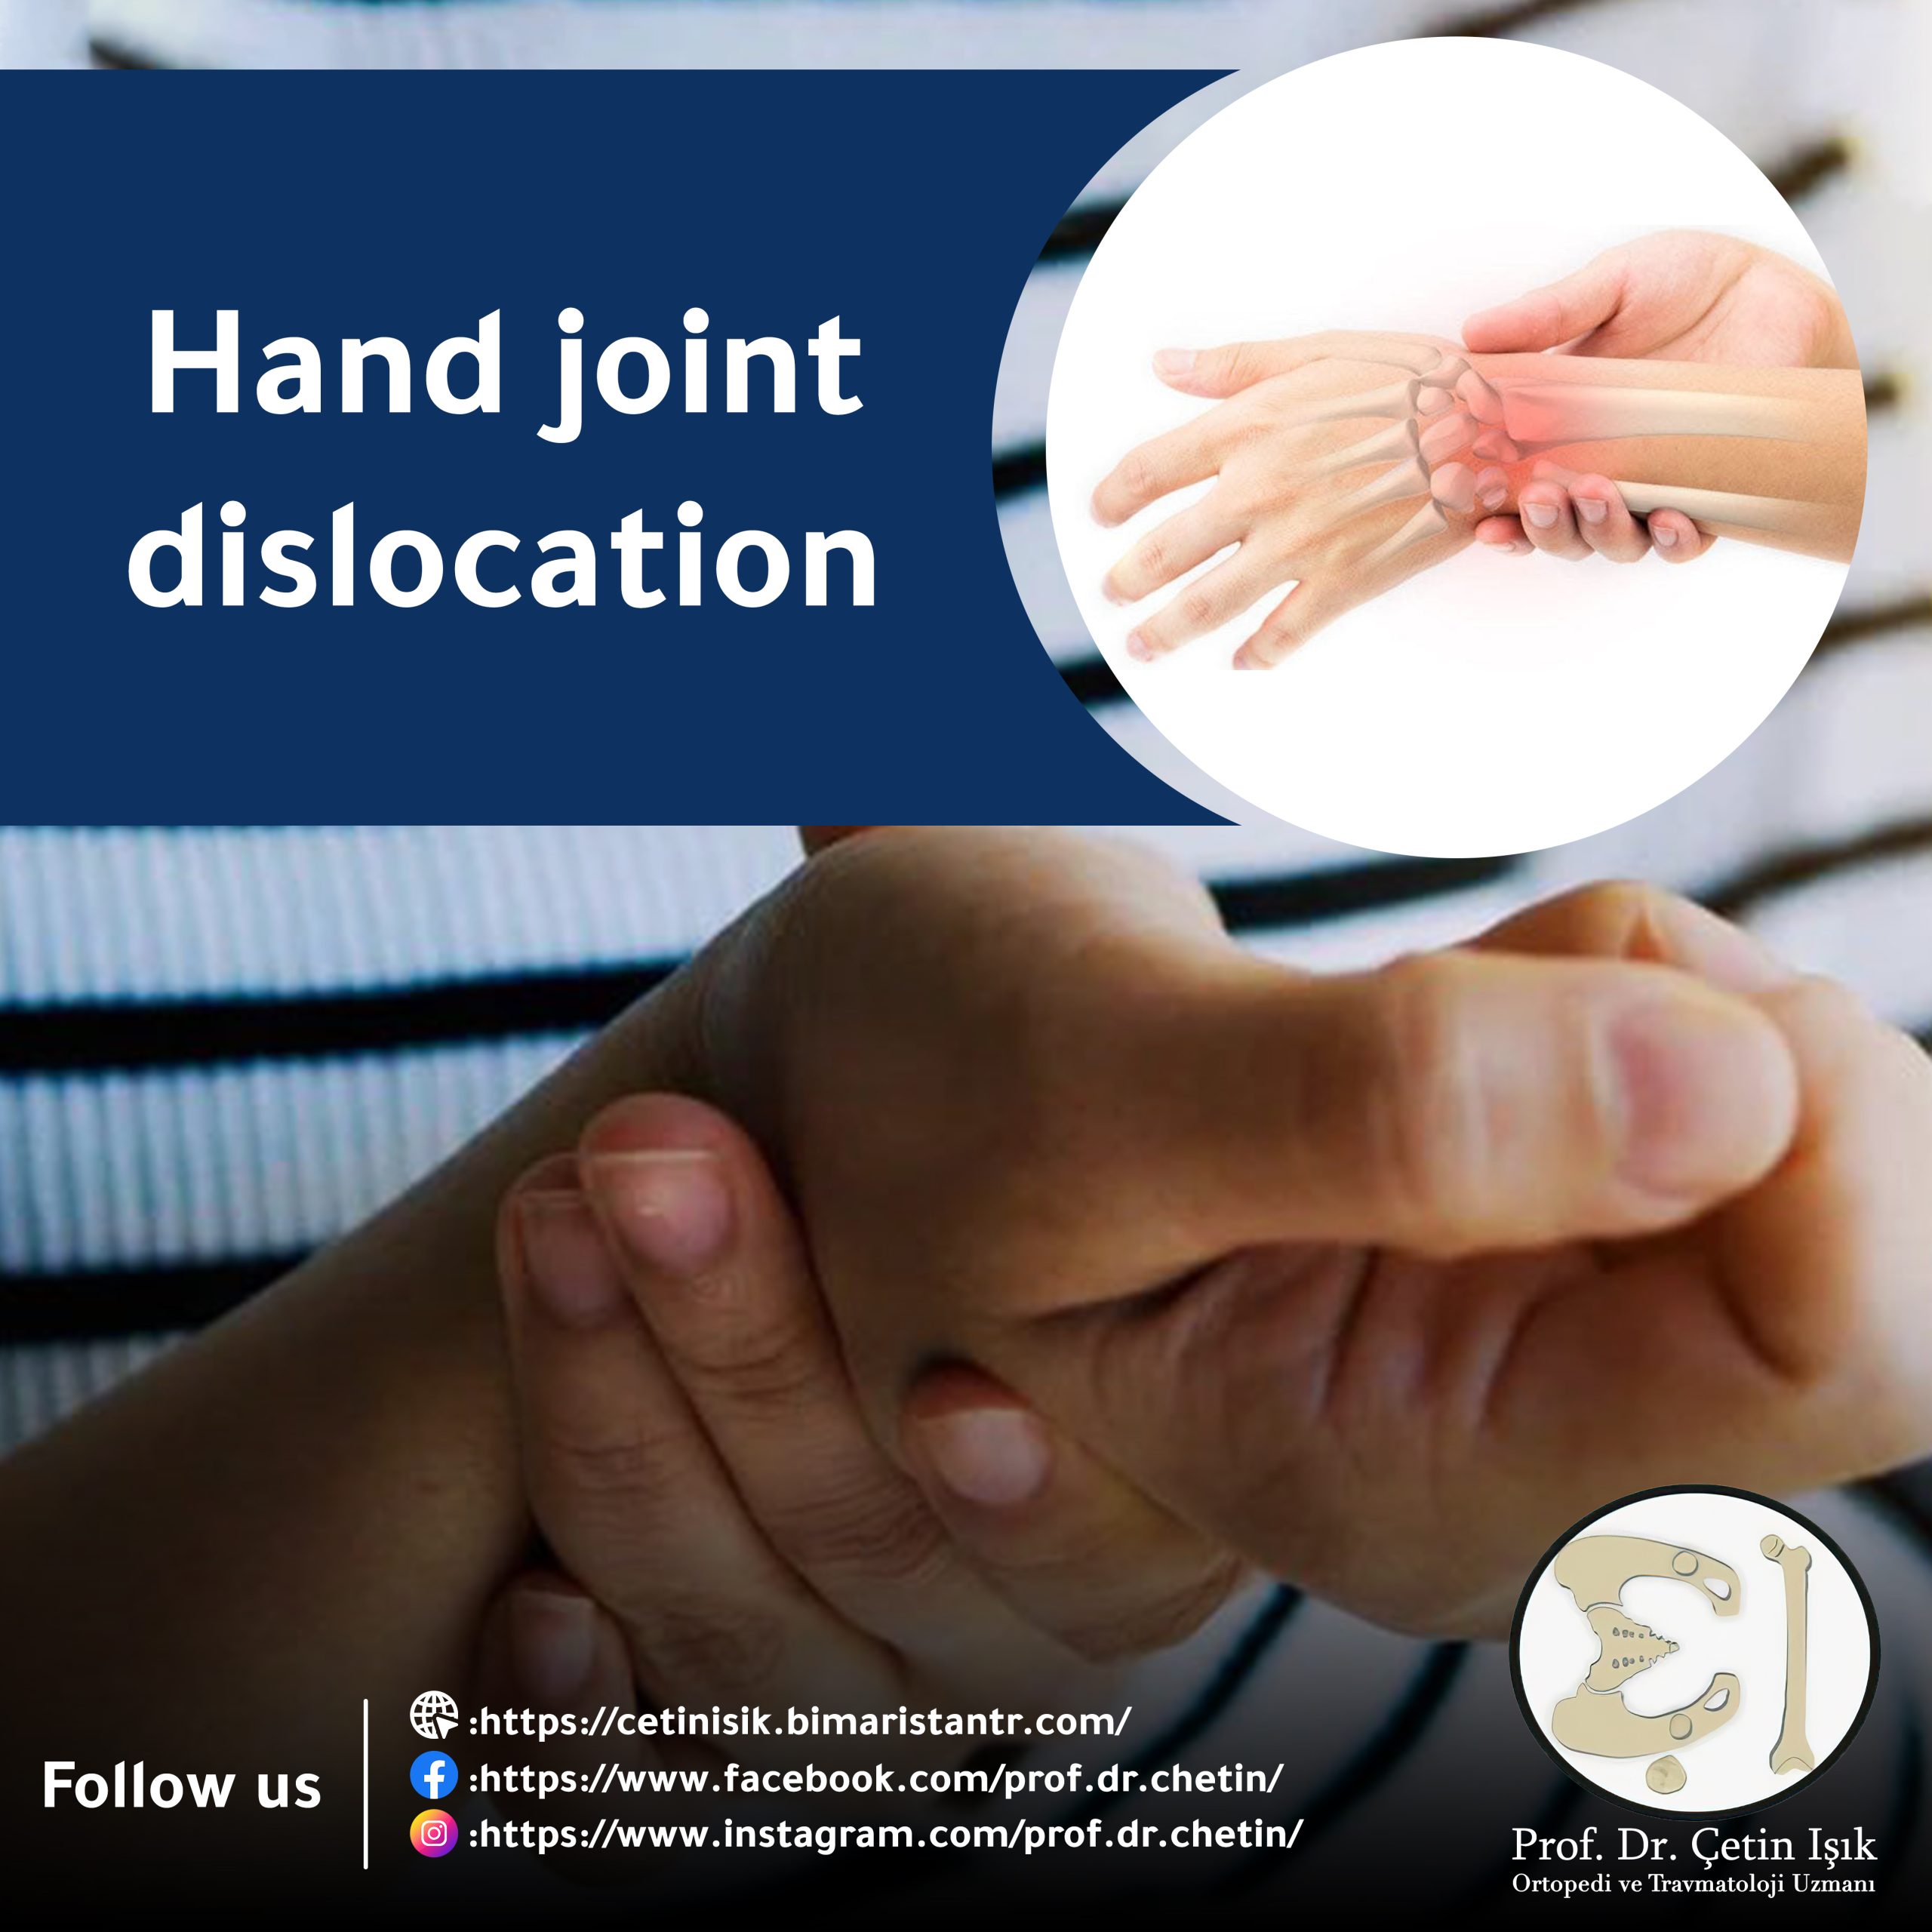 Cover image of the dislocation of the hand joint article